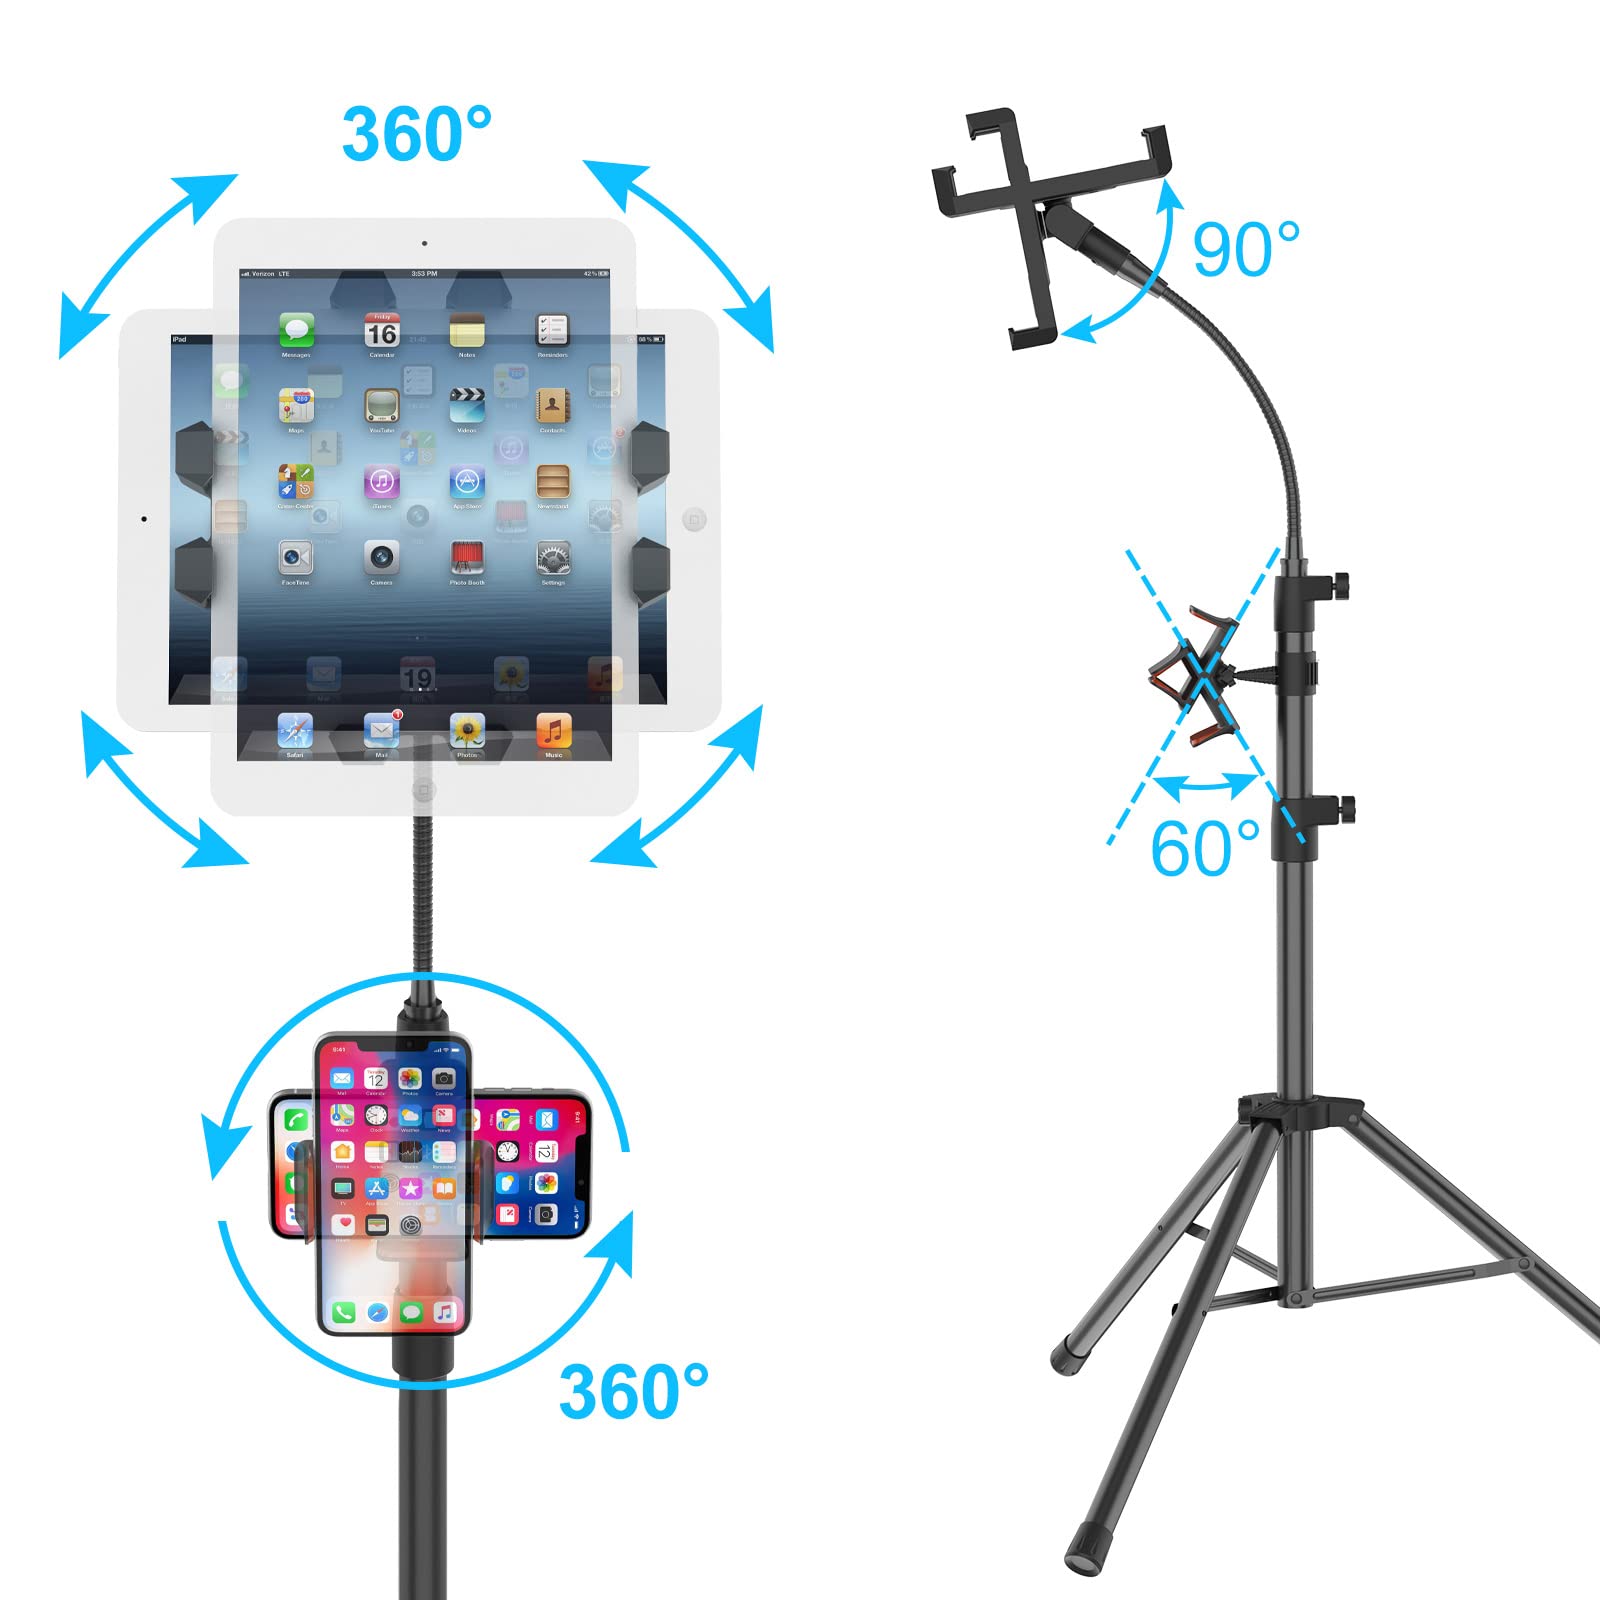 Ipad Tripod Stand,Gooseneck 63-inch Floor Stand for Tablet, iPad Floor Stand with 360° Rotating iPad Tripod Mount for iPhone iPad Mini, iPad Air, iPad Pro and All 4.7-12.9 Inch Tablets